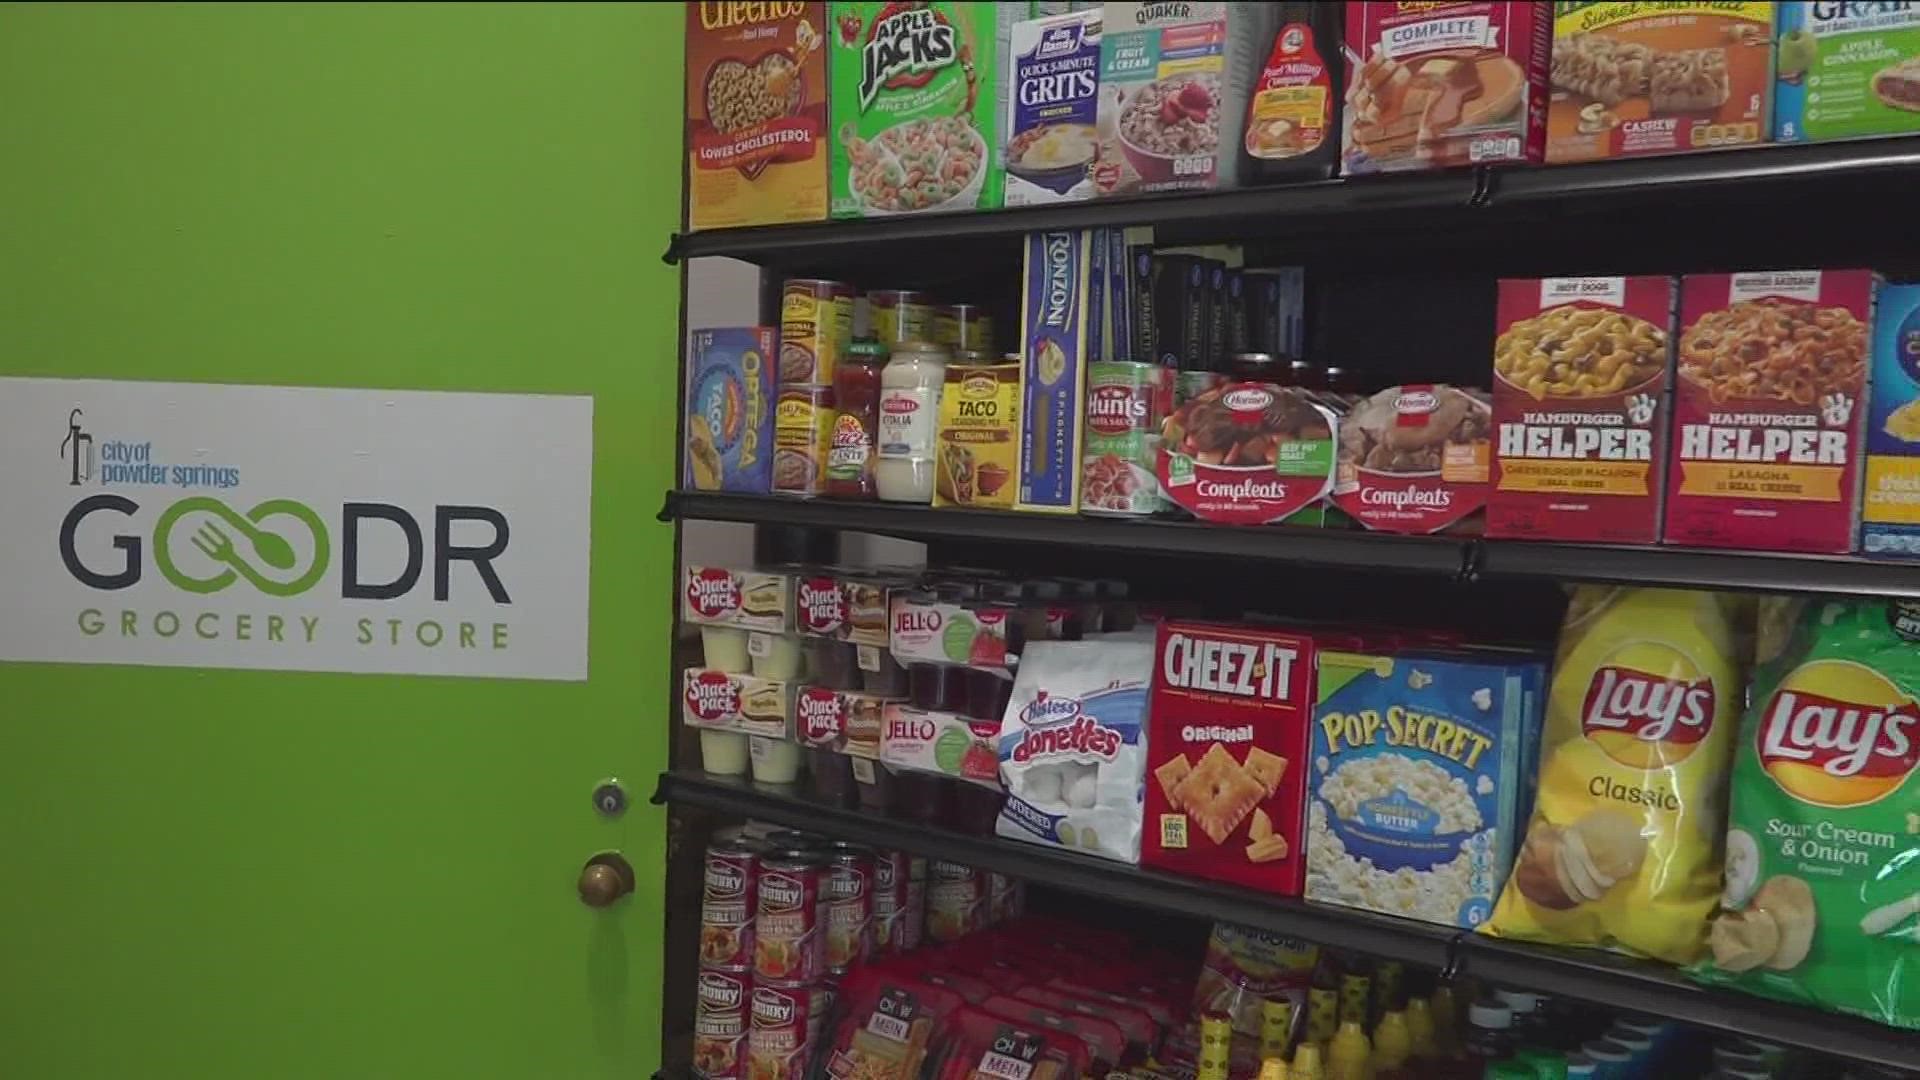 Goodr opens its fifth free grocery store at Tapp Middle School in Powder Springs Wednesday.